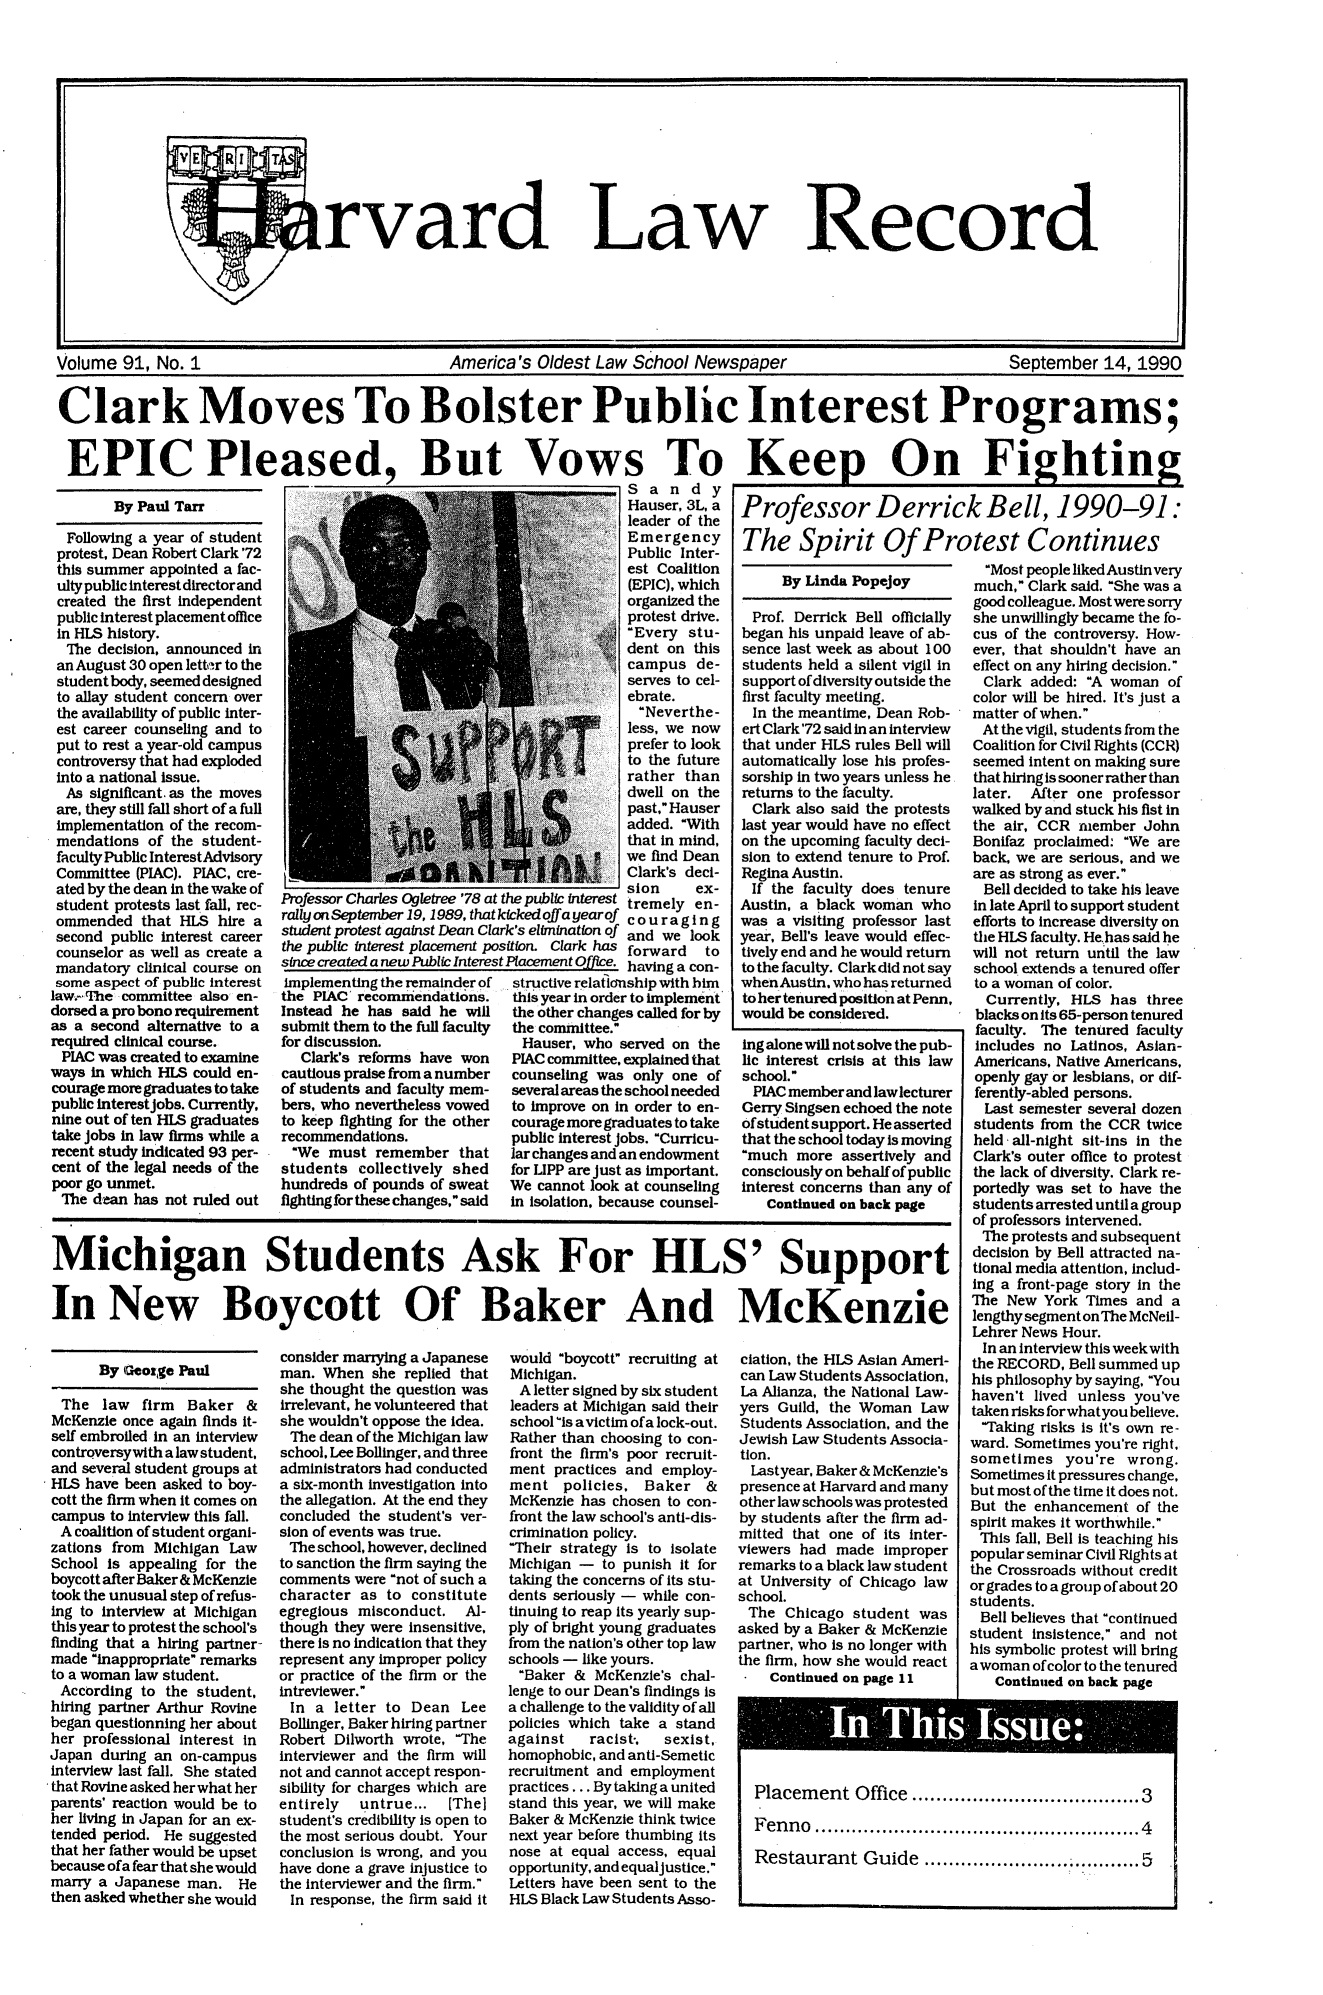 handle is hein.journals/hlrec91 and id is 1 raw text is: rvard

Law

Record

Volume 91, No. 1      America's Oldest Law School Newspaper  September 14, 1990
Clark Moves To Bolster Public Interest Programs;
EPIC Pleased, But Vows To Keep On Fighting

By Paul Tarr
Following a year of student
protest, Dean Robert Clark '72
this summer appointed a fac-
ulty public interest director and
created the first independent
public interest placement office
in HLS history.
The decision, announced in
an August 30 open letter to the
student body, seemed designed
to allay student concern over
the availability of public inter-
est career counseling and to
put to rest a year-old campus
controversy that had exploded
into a national issue.
As significant. as the moves
are, they still fall short of a full
implementation of the recom-
mendations of the student-
faculty Public InterestAdvisory
Committee (PIAC). PIAC, cre-
ated by the dean in the wake of
student protests last fall, rec-
ommended that HLS hire a
second public interest career
counselor as well as create a
mandatory clinical course on
some aspect of public interest
law.-The committee also en-
dorsed a pro bono requirement
as a second alternative to a
required clinical course.
PIAC was created to examine
ways in which HLS could en-
courage more graduates to take
public interestjobs. Currently,
nine out of ten HLS graduates
take jobs in law firms while a
recent study indicated 93 per-
cent of the legal needs of the
poor go unmet.
The dean has not ruled out

Professor Charles Ogletree '78 at t
rally on September 19,1989, that k
student protest against Dean Clar
the public interest placement pos
since created a new Public InterestI
implementing the remainder of
the PIAC' recommendations.
Instead he has said he will
submit them to the full faculty
for discussion.
Clark's reforms have won
cautious praise from a number
of students and faculty mem-
bers, who nevertheless vowed
to keep fighting for the other
recommendations.
We must remember that
students collectively shed
hundreds of pounds of sweat
fighting for these changes, said

Sand y
Hauser, 3L, a
leader of the
Emergency
Public Inter-
est Coalition
(EPIC), which
organized the
protest drive.
J Every stu-
dent on this
campus de-
serves to cel-
ebrate.
Neverthe-
less, we now
prefer to look
to the future
rather than
dwell on the
past, Hauser
added. With
that in mind,
we find Dean
Clark's deci-
sion ex-
he public interest tremely en-
fcked offayearof couraging
k's elimination of and we look
itIon. Clark has forward  to
Placement Offee. having a con-
structive relationship with him
this year in order to implement
the other changes called for by
the committee.
Hauser, who served on the
PIAC committee, explained that
counseling was only one of
several areas the school needed
to improve on in order to en-
courage more graduates to take
public interest jobs. Curricu-
lar changes and an endowment
for LIPP are just as important.
We cannot look at counseling
in isolation, because counsel-

By Linda Popejoy
Prof. Derrick Bell officially
began his unpaid leave of ab-
sence last week as about 100
students held a silent vigil in
support of diversity outside the
first faculty meeting.
In the meantime, Dean Rob-
ert Clark'72 said in an interview
that under HLS rules Bell will
automatically lose his profes-
sorship in two years unless he
returns to the faculty.
Clark also said the protests
last year would have no effect
on the upcoming faculty deci-
sion to extend tenure to Prof.
Regina Austin.
If the faculty does tenure
Austin, a black woman who
was a visiting professor last
year, Bell's leave would effec-
tively end and he would return
tothefaculty. Clarkdidnotsay
when Austin, who has returned
to her tenured position at Penn,
would be considered.
ing alone will not solve the pub-
lic interest crisis at this law
school.
PIAC member and law lecturer
Gerry Singsen echoed the note
ofstudent support. He asserted
that the school today is moving
much more assertively and
consciously on behalf of public
interest concerns than any of
Continued on back page

Michigan Students Ask For HLS' Support
In New Boycott Of Baker And McKenzie

By (Geozge Paul
The law firm Baker &
McKenzie once again finds it-
self embroiled in an interview
controversywith a law student,
and several student groups at
HLS have been asked to boy-
cott the firm when it comes on
campus to interview this fall.
A coalition of student organi-
zations from Michigan Law
School is appealing for the
boycott after Baker& McKenzie
took the unusual step of refus-
ing to interview at Michigan
this year to protest the school's
finding that a hiring partner-
made inappropriate remarks
to a woman law student.
According to the student,
hiring partner Arthur Rovine
began questionning her about
her professional interest in
Japan during an on-campus
interview last fall. She stated
that Rovine asked her what her
parents' reaction would be to
her living in Japan for an ex-
tended period. He suggested
that her father would be upset
because ofa fear that she would
marry a Japanese man. He
then asked whether she would

consider marrying a Japanese
man. When she replied that
she thought the question was
irrelevant, he volunteered that
she wouldn't oppose the idea.
The dean of the Michigan law
school, Lee Bollinger, and three
administrators had conducted
a six-month investigation into
the allegation. At the end they
concluded the student's ver-
sion of events was true.
The school, however, declined
to sanction the firm saying the
comments were not of such a
character as to constitute
egregious misconduct. Al-
though they were insensitive,
there is no indication that they
represent any improper policy
or practice of the firm or the
intreviewer.
In a letter to Dean Lee
Bollinger, Baker hiring partner
Robert Dilworth wrote, The
interviewer and the firm will
not and cannot accept respon-
sibility for charges which are
entirely  untrue... [The]
student's credibility is open to
the most serious doubt. Your
conclusion is wrong, and you
have done a grave injustice to
the interviewer and the firm.
In response, the firm said it

would boycott recruiting at
Michigan.
A letter signed by six student
leaders at Michigan said their
school'is a victim of a lock-out.
Rather than choosing to con-
front the firm's poor recruit-
ment practices and employ-
ment policies, Baker &
McKenzie has chosen to con-
front the law school's anti-dis-
crimination policy.
Their strategy is to isolate
Michigan - to punish it for
taking the concerns of its stu-
dents seriously - while con-
tinuing to reap its yearly sup-
ply of bright young graduates
from the nation's other top law
schools - like yours.
Baker & McKenzie's chal-
lenge to our Dean's findings is
a challenge to the validity of all
policies which take a stand
against   racist-.  sexist,
homophobic, and anti-Semetic
recruitment and employment
practices ... By taking a united
stand this year, we will make
Baker & McKenzie think twice
next year before thumbing its
nose at equal access, equal
opportunity, and equaljustice.
Letters have been sent to the
HLS Black Law Students Asso-

ciation, the HLS Asian Ameri-
can Law Students Association,
La Alianza, the National Law-
yers Guild, the Woman Law
Students Association, and the
Jewish Law Students Associa-
tion.
Last year. Baker & McKenzie's
presence at Harvard and many
other law schools was protested
by students after the firm ad-
mitted that one of its inter-
viewers had made improper
remarks to a black law student
at University of Chicago law
school.
The Chicago student was
asked by a Baker & McKenzie
partner, who is no longer with
the firm, how she would react
* Continued on page 11

Most people liked Austinvery
much, Clark said. She was a
good colleague. Most were sorry
she unwillingly became the fo-
cus of the controversy. How-
ever, that shouldn't have an
effect on any hiring decision.
Clark added: A woman of
color will be hired. It's just a
matter of when.
At the vigil, students from the
Coalition for Civil Rights (CCR)
seemed intent on making sure
that hiring is sooner rather than
later.  After one professor
walked by and stuck his fist in
the air, CCR member John
Bonifaz proclaimed: We are
back, we are serious, and we
are as strong as ever.
Bell decided to take his leave
in late April to support student
efforts to increase diversity on
the HLS faculty. He has said he
will not return until the law
school extends a tenured offer
to a woman of color.
Currently. HLS has three
blacks on its 65-person tenured
faculty. The tenured faculty
Includes no Latinos, Asian-
Americans, Native Americans,
openly gay or lesbians, or dif-
ferently-abled persons.
Last semester several dozen
students from the CCR twice
held all-night sit-ins in the
Clark's outer office to protest
the lack of diversity. Clark re-
portedly was set to have the
students arrested until a group
of professors intervened.
The protests and subsequent
decision by Bell attracted na-
tional media attention, Includ-
ing a front-page story in the
The New York Times andea
lengthy segment on The McNeil-
Lehrer News Hour.
In an interview this week with
the RECORD, Bell summed up
his philosophy by saying, You
haven't lived unless you've
taken risks forwhatyou believe.
Taking risks is it's own re-
ward. Sometimes you're right,
sometimes you're wrong.
Sometimes it pressures change,
but most of the time it does not.
But the enhancement of the
spirit makes it worthwhile.
This fall, Bell is teaching his
popular seminar Civil Rights at
the Crossroads without credit
or grades to a group of about 20
students.
Bell believes that continued
student insistence, and not
his symbolic protest will bring
a woman of color to the tenured
Continued on back page

Placement Office ..   ....................... 3
Fenno  .................................................. 4
Restaurant Guide...................... 5

Professor Derrick Bell, 1990-91:
The Spirit Of Protest Continues

I                                                                                                                                                                                                                                                                                                                                                                                                                                                                                                                 I


